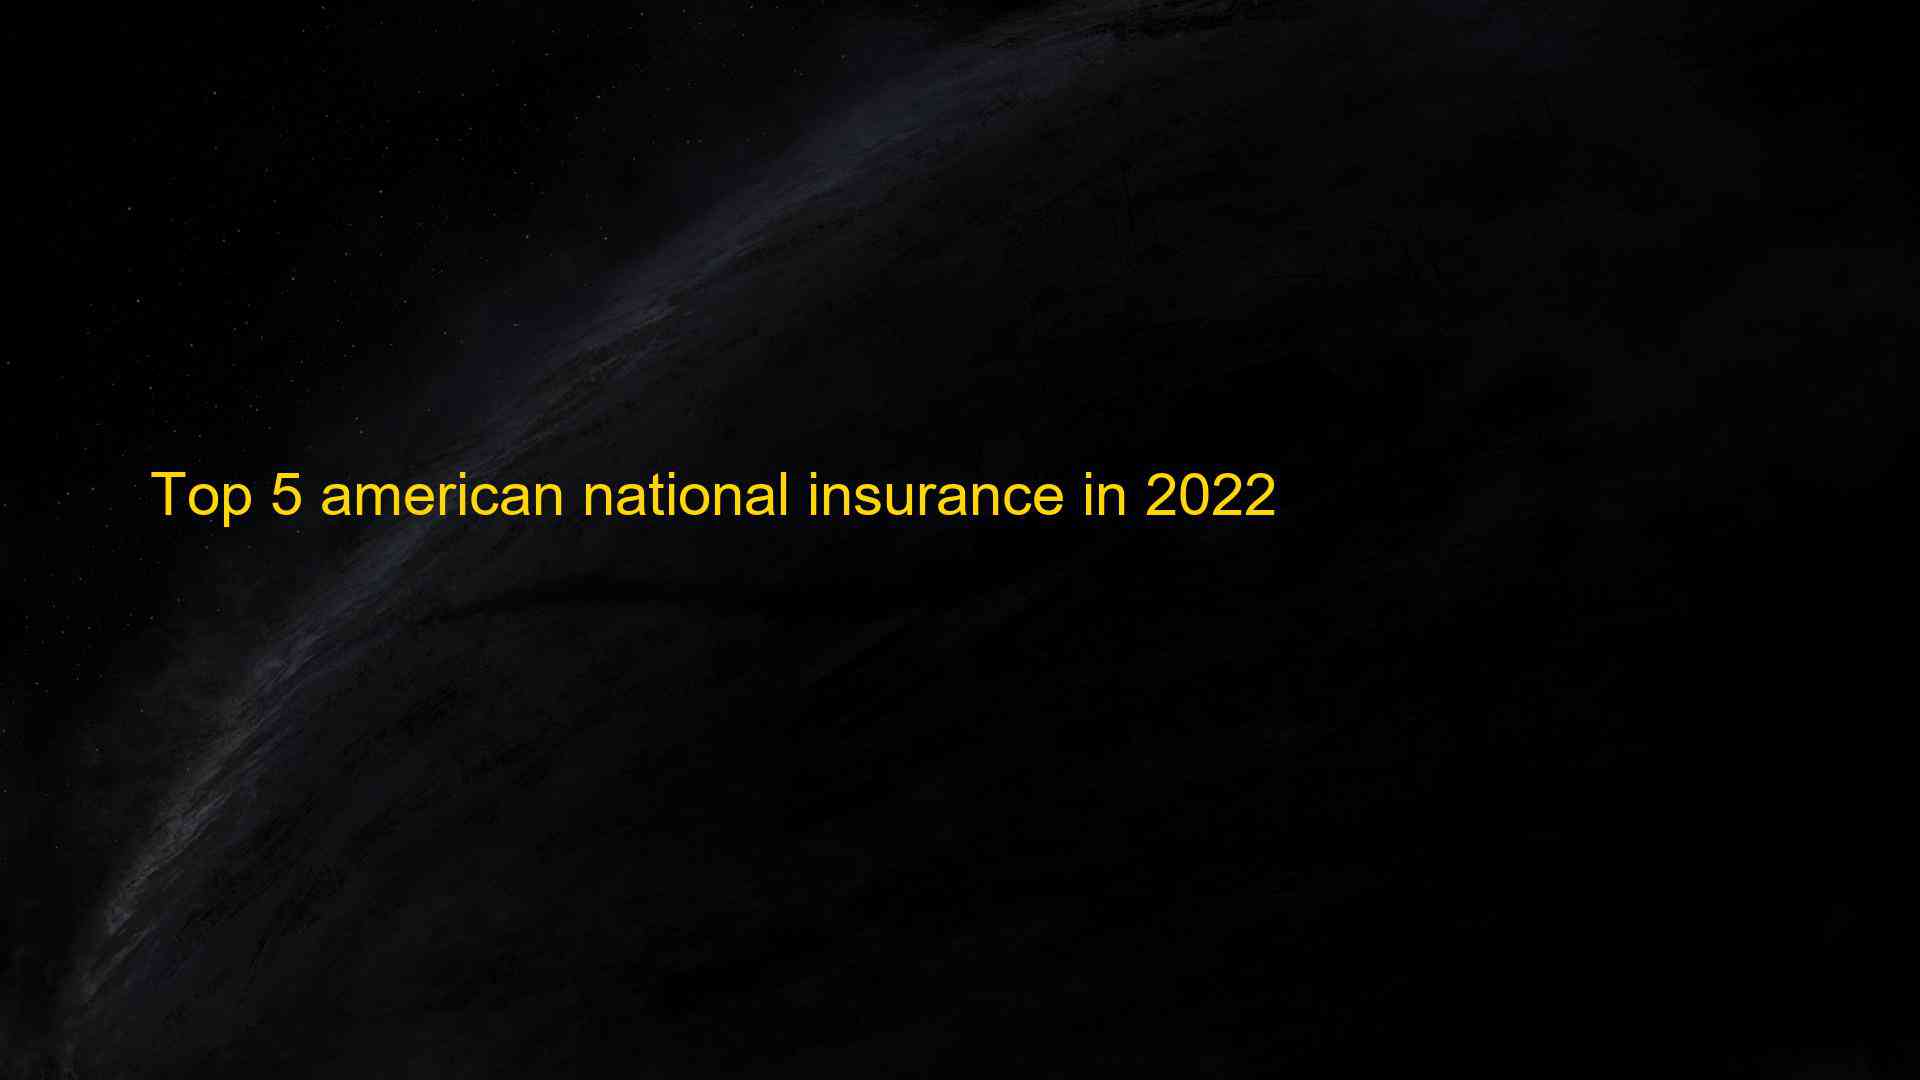 Top 5 american national insurance in 2022 1660483387